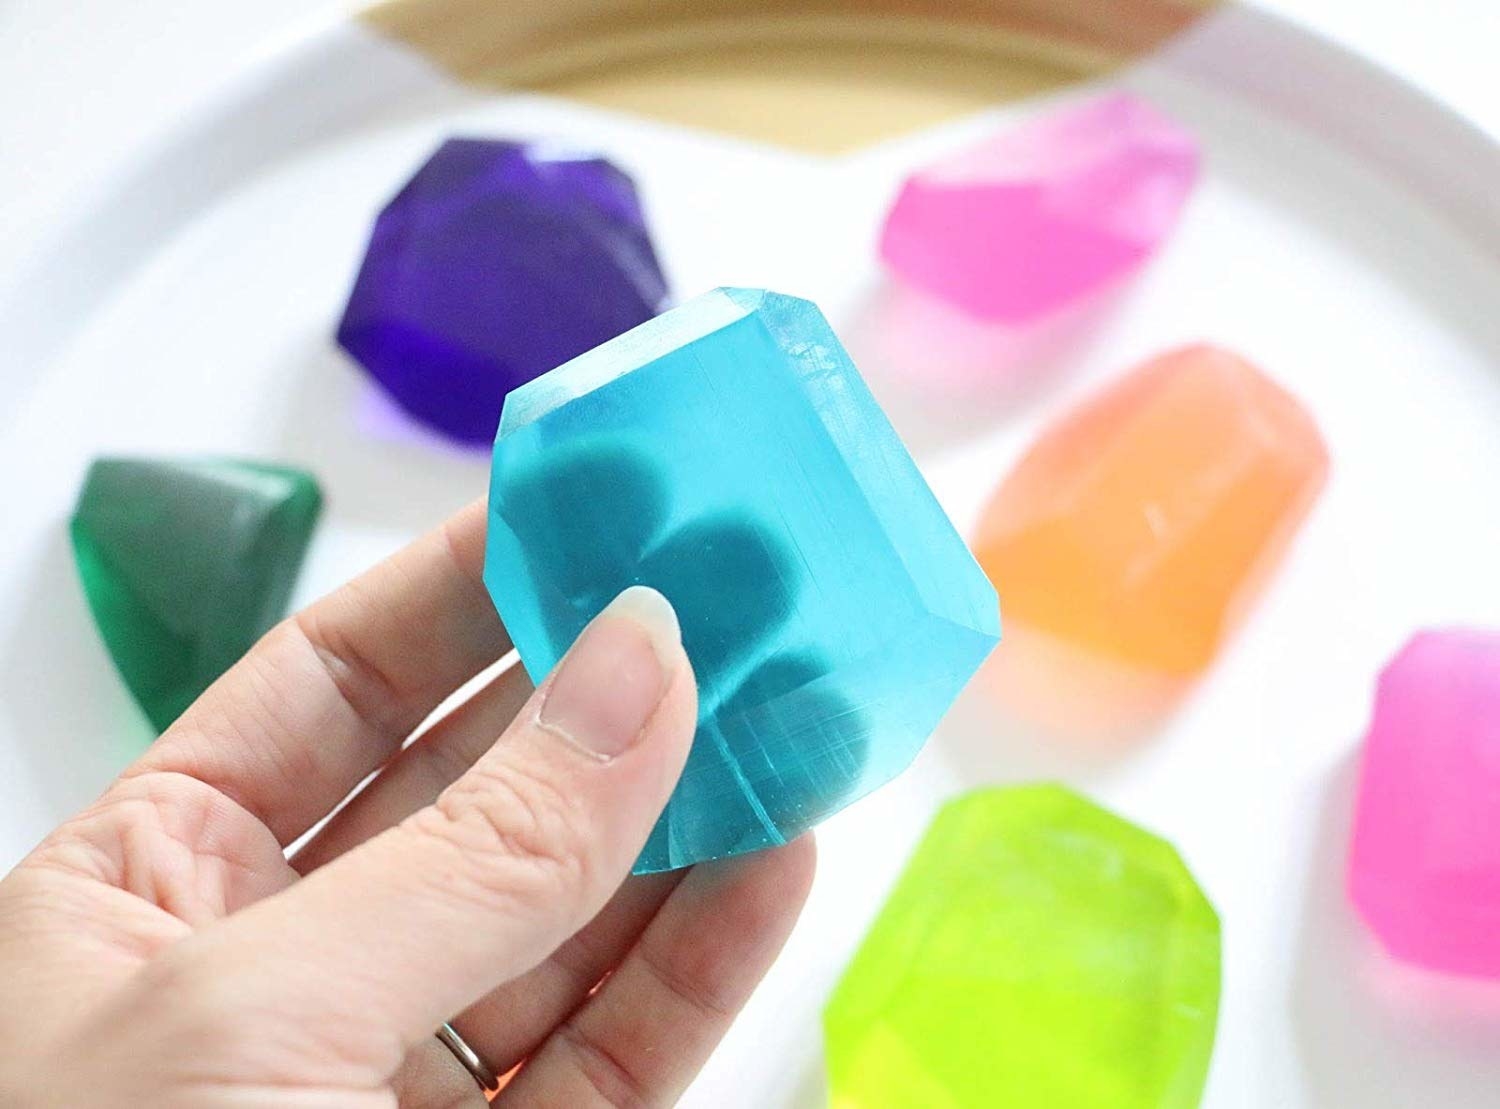 Bar soaps in different colors and geode shapes 